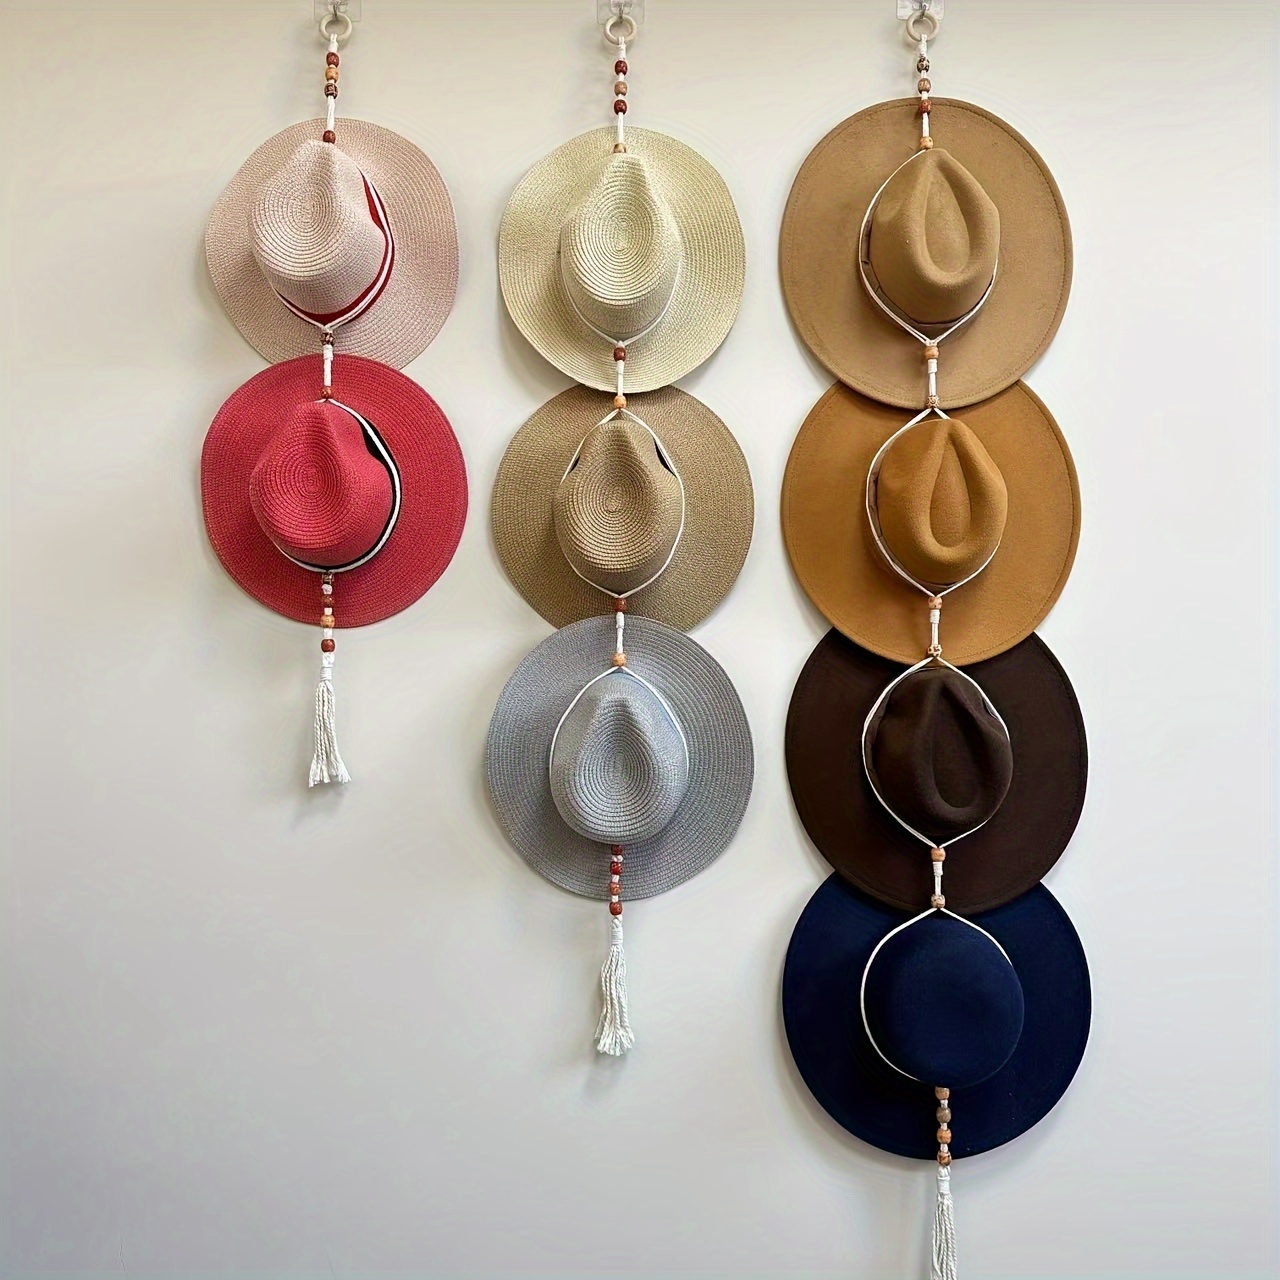 

Boho Chic Macrame Hat Hanger - Adjustable, Wall-mounted Organizer For Wide Brim & Fedora Hats, Easy Install, Space-saving Design